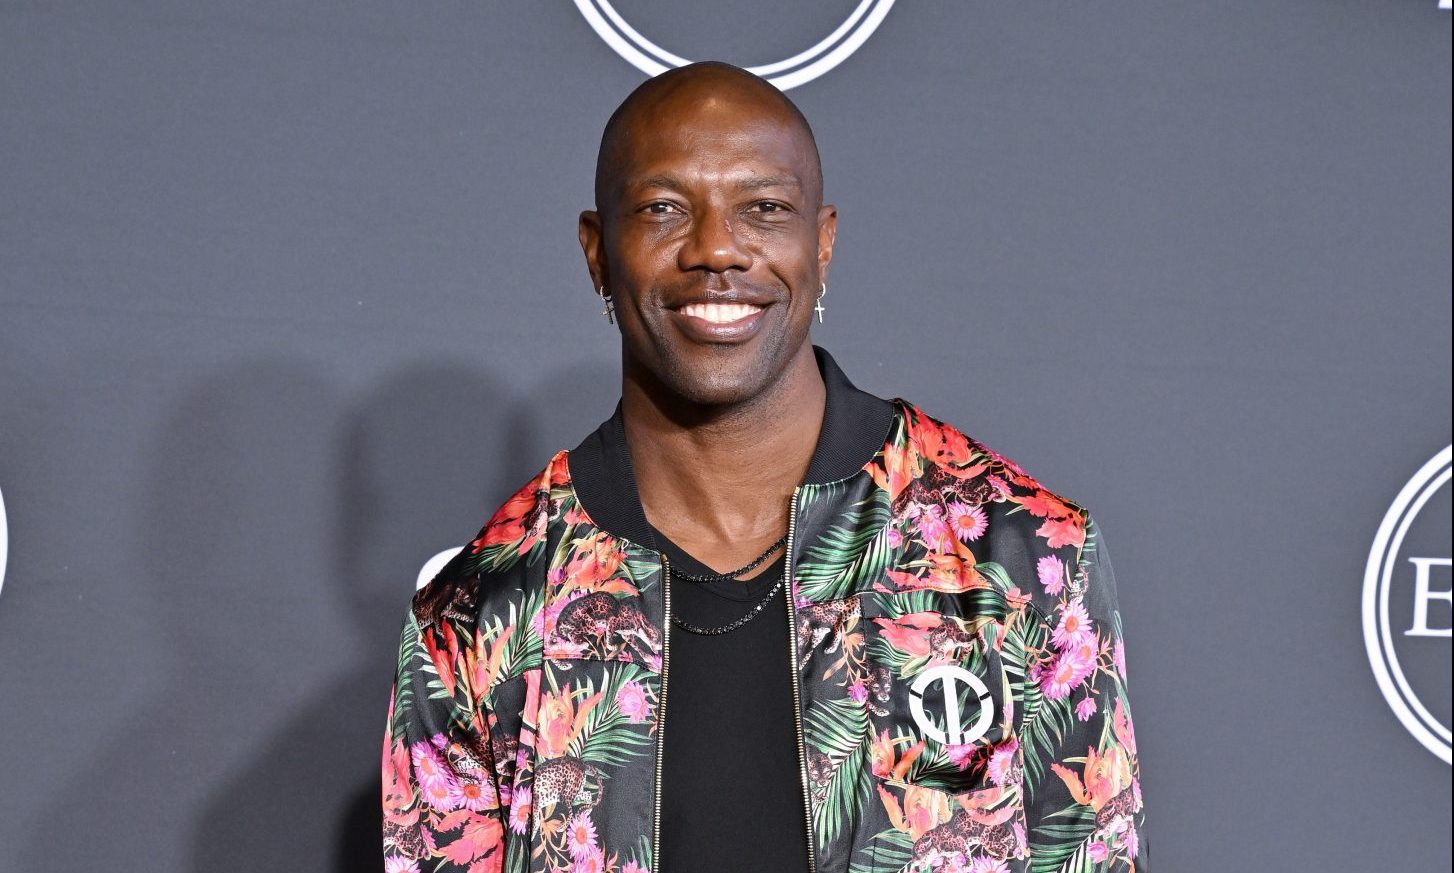 Terrell Owens Shares Video Encounter With A “Karen” In His Neighborhood Who Falsely Accused Him Of Attacking Her